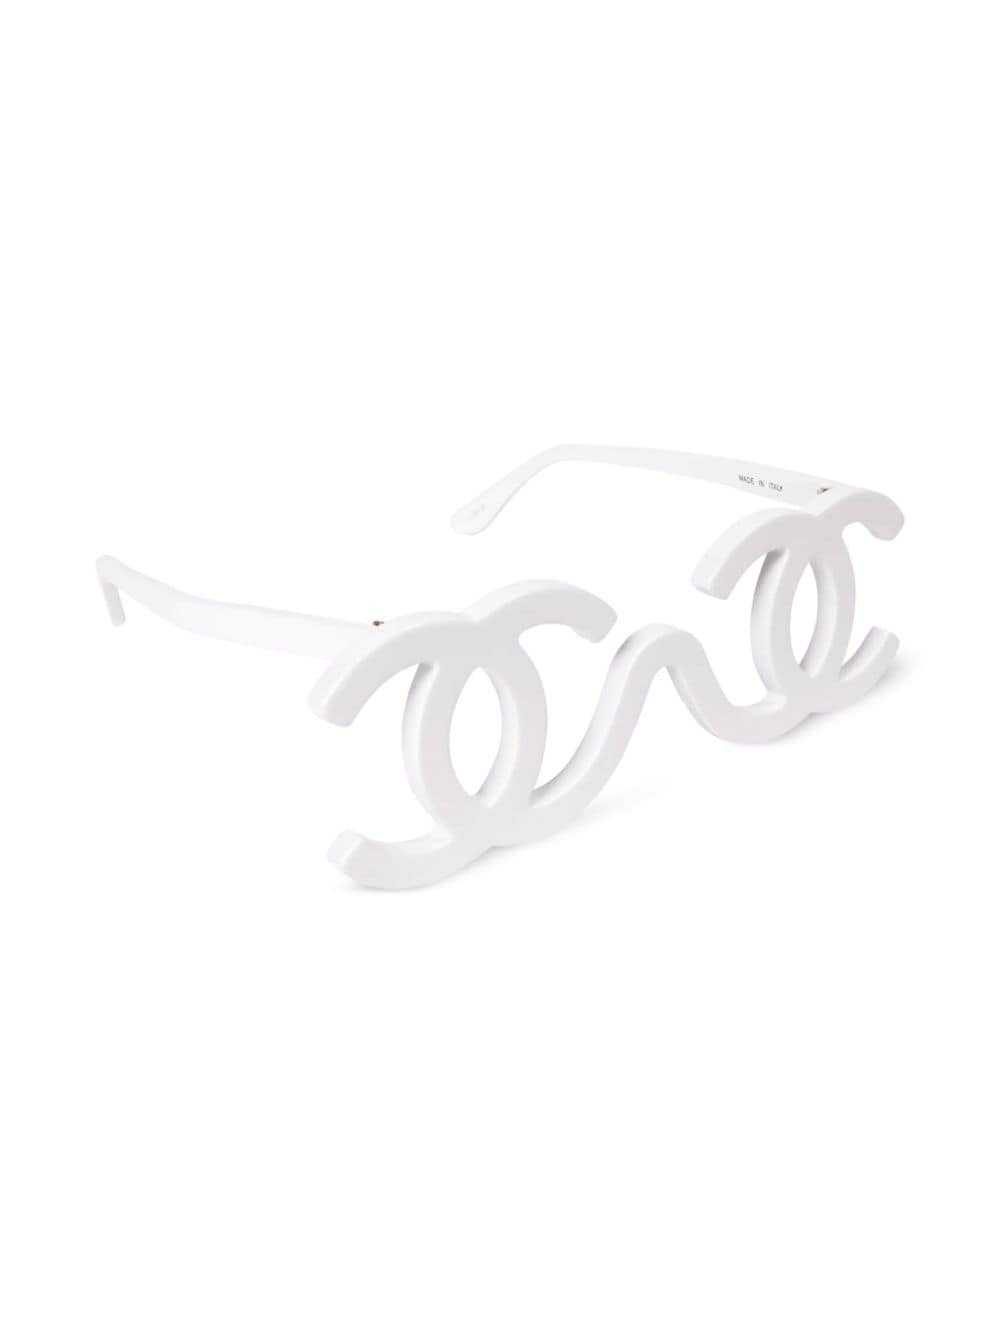 CHANEL Pre-Owned 1994 CC Runway sunglasses - White - image 3